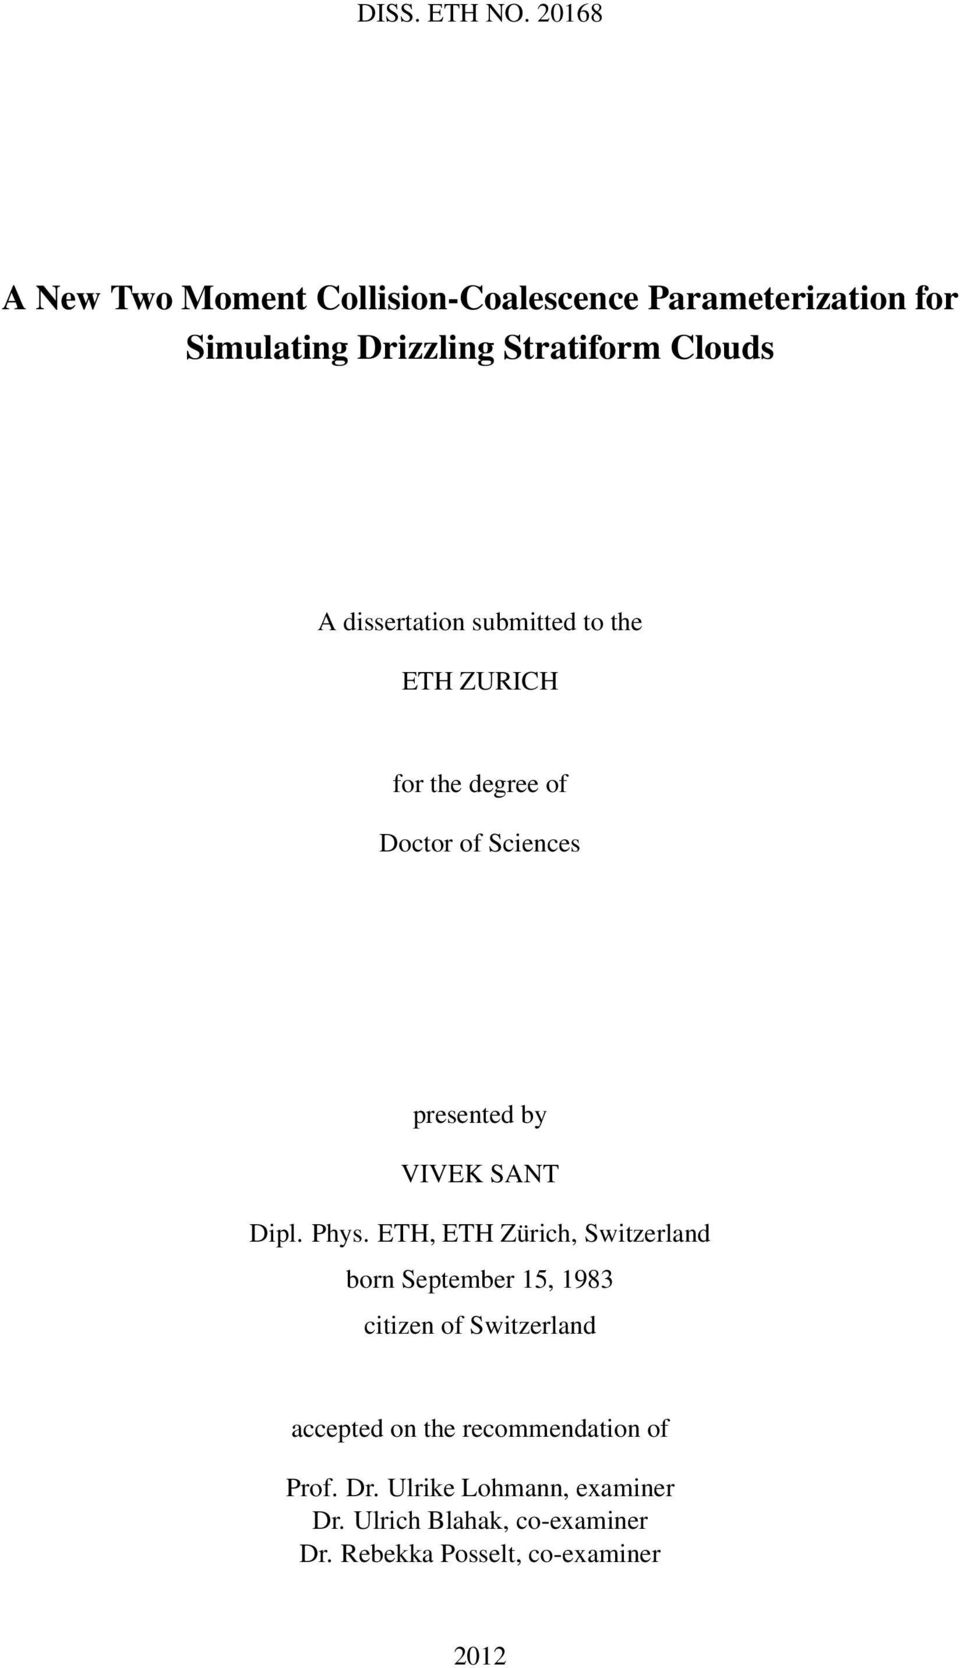 dissertation submitted to the ETH ZURICH for the degree of Doctor of Sciences presented by VIVEK SANT Dipl.